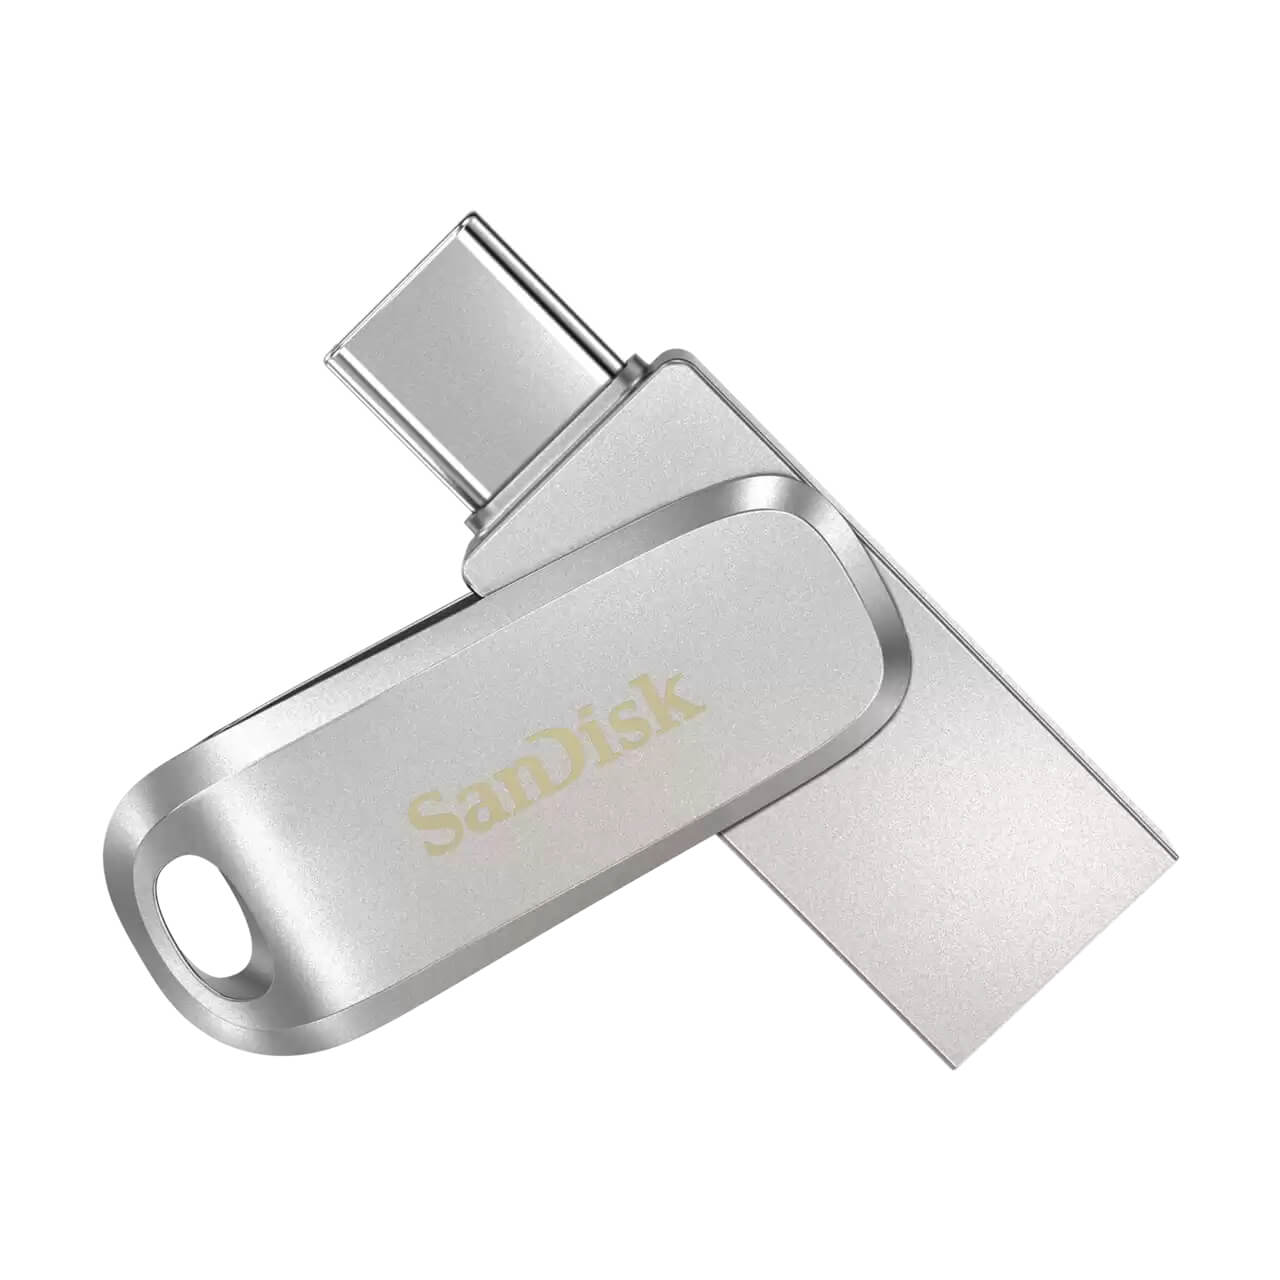 SANDISK 64G ULTRA DUAL LUXE USB-C/A FLASH DRIVE